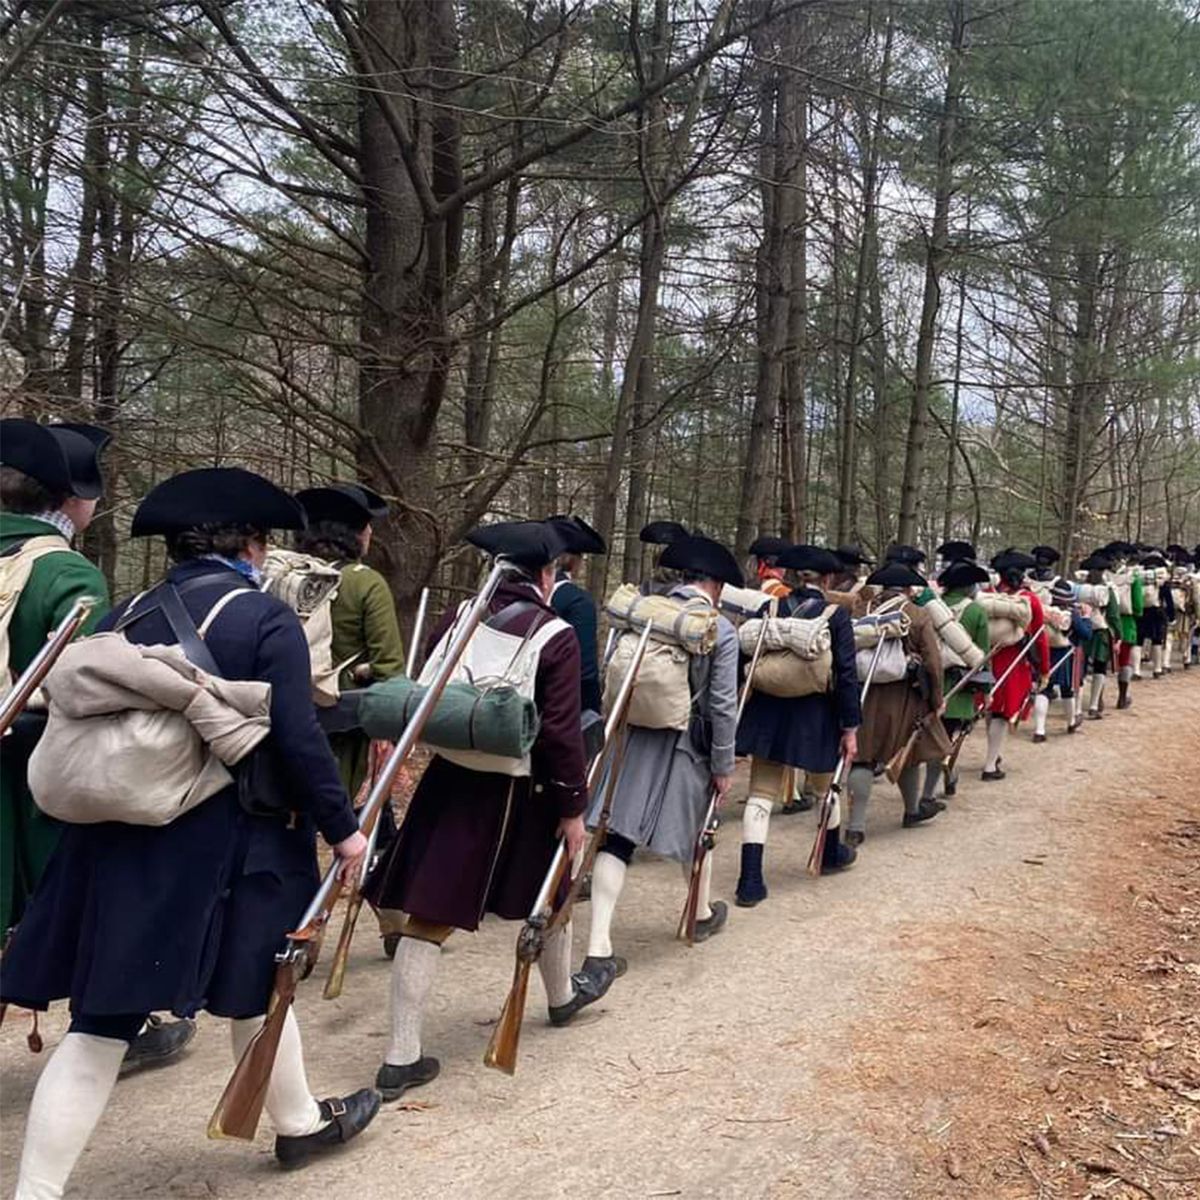 As you may know, #April19th is an important anniversary for the #USA and also @JoelBohy's favorite time of the year! Read all about his time during the 249th anniversary festivities in #Massachusetts on the #BruneauBlog at buff.ly/3UB1Qdb